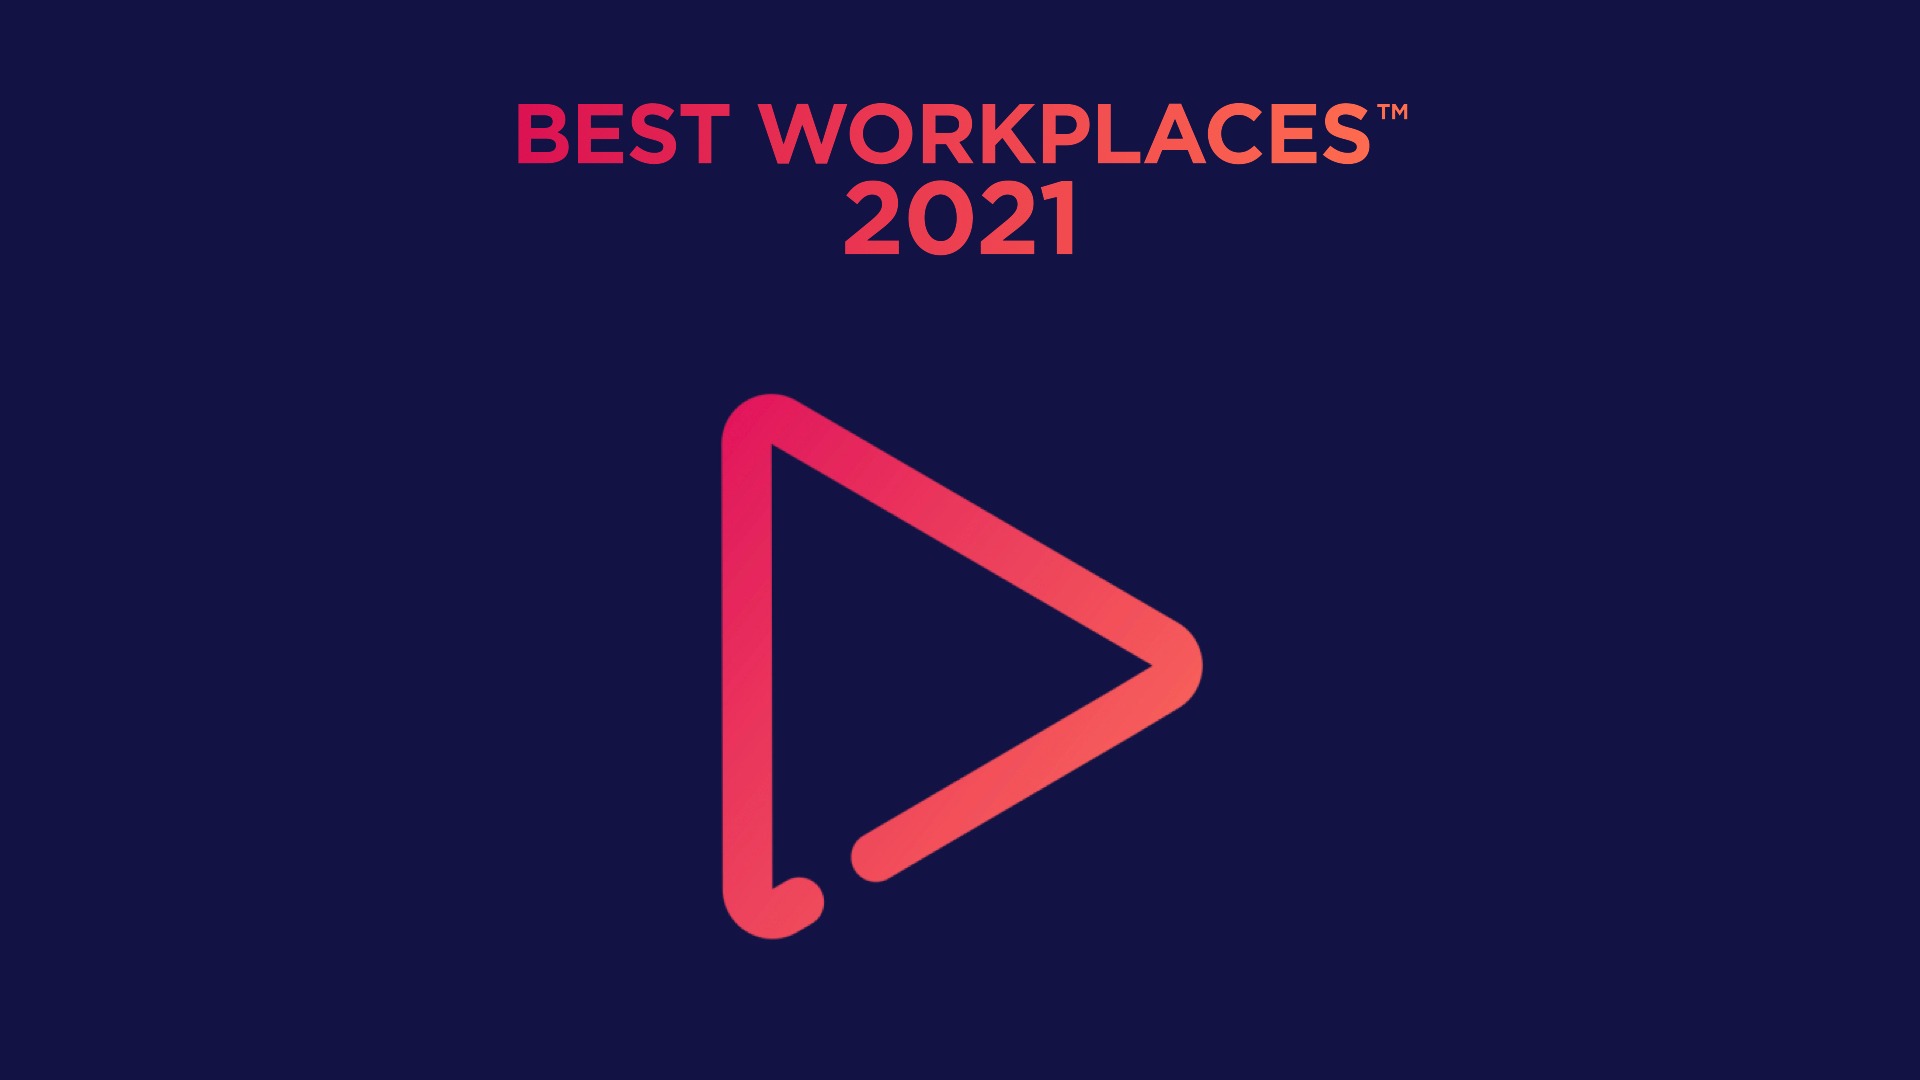 Best Workplaces™ Award Event 2021 | Great Place To Work - English